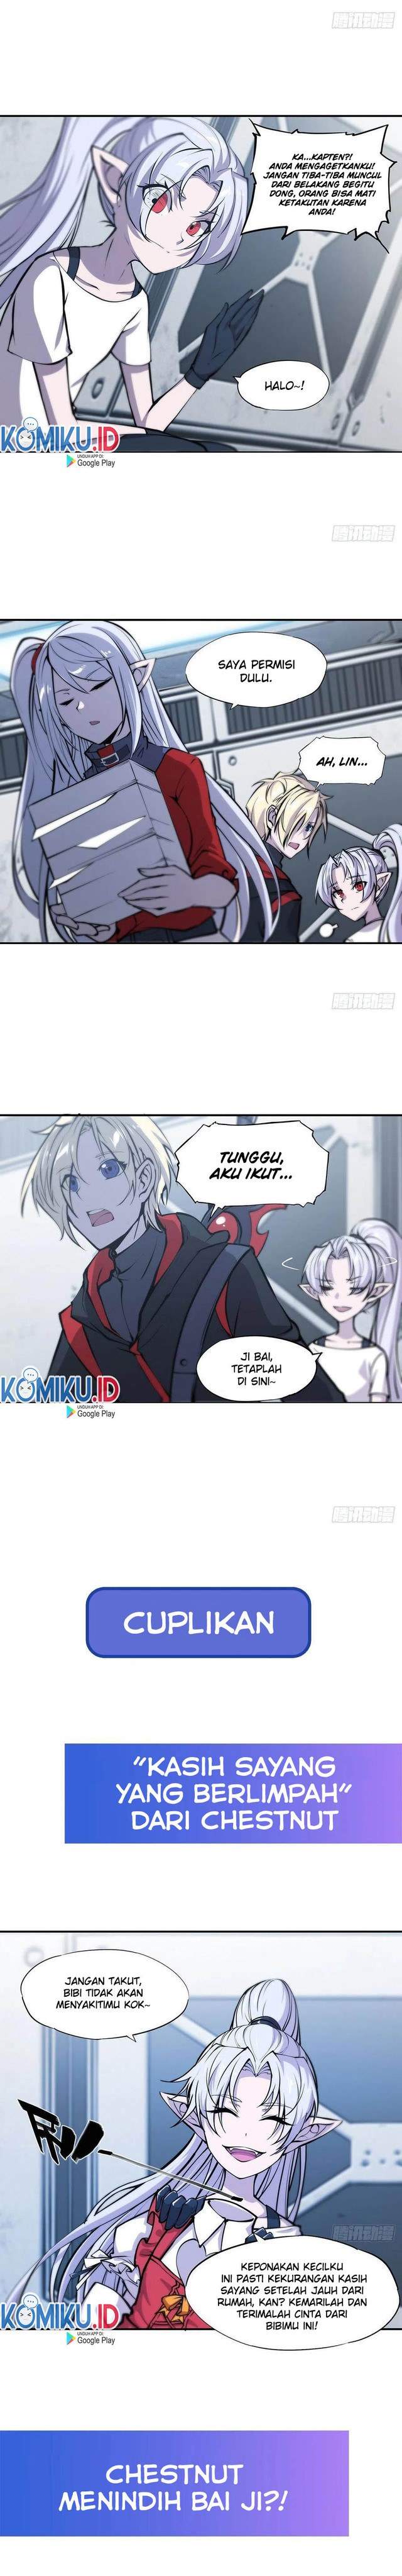 The Blood Princess and the Knight Chapter 99